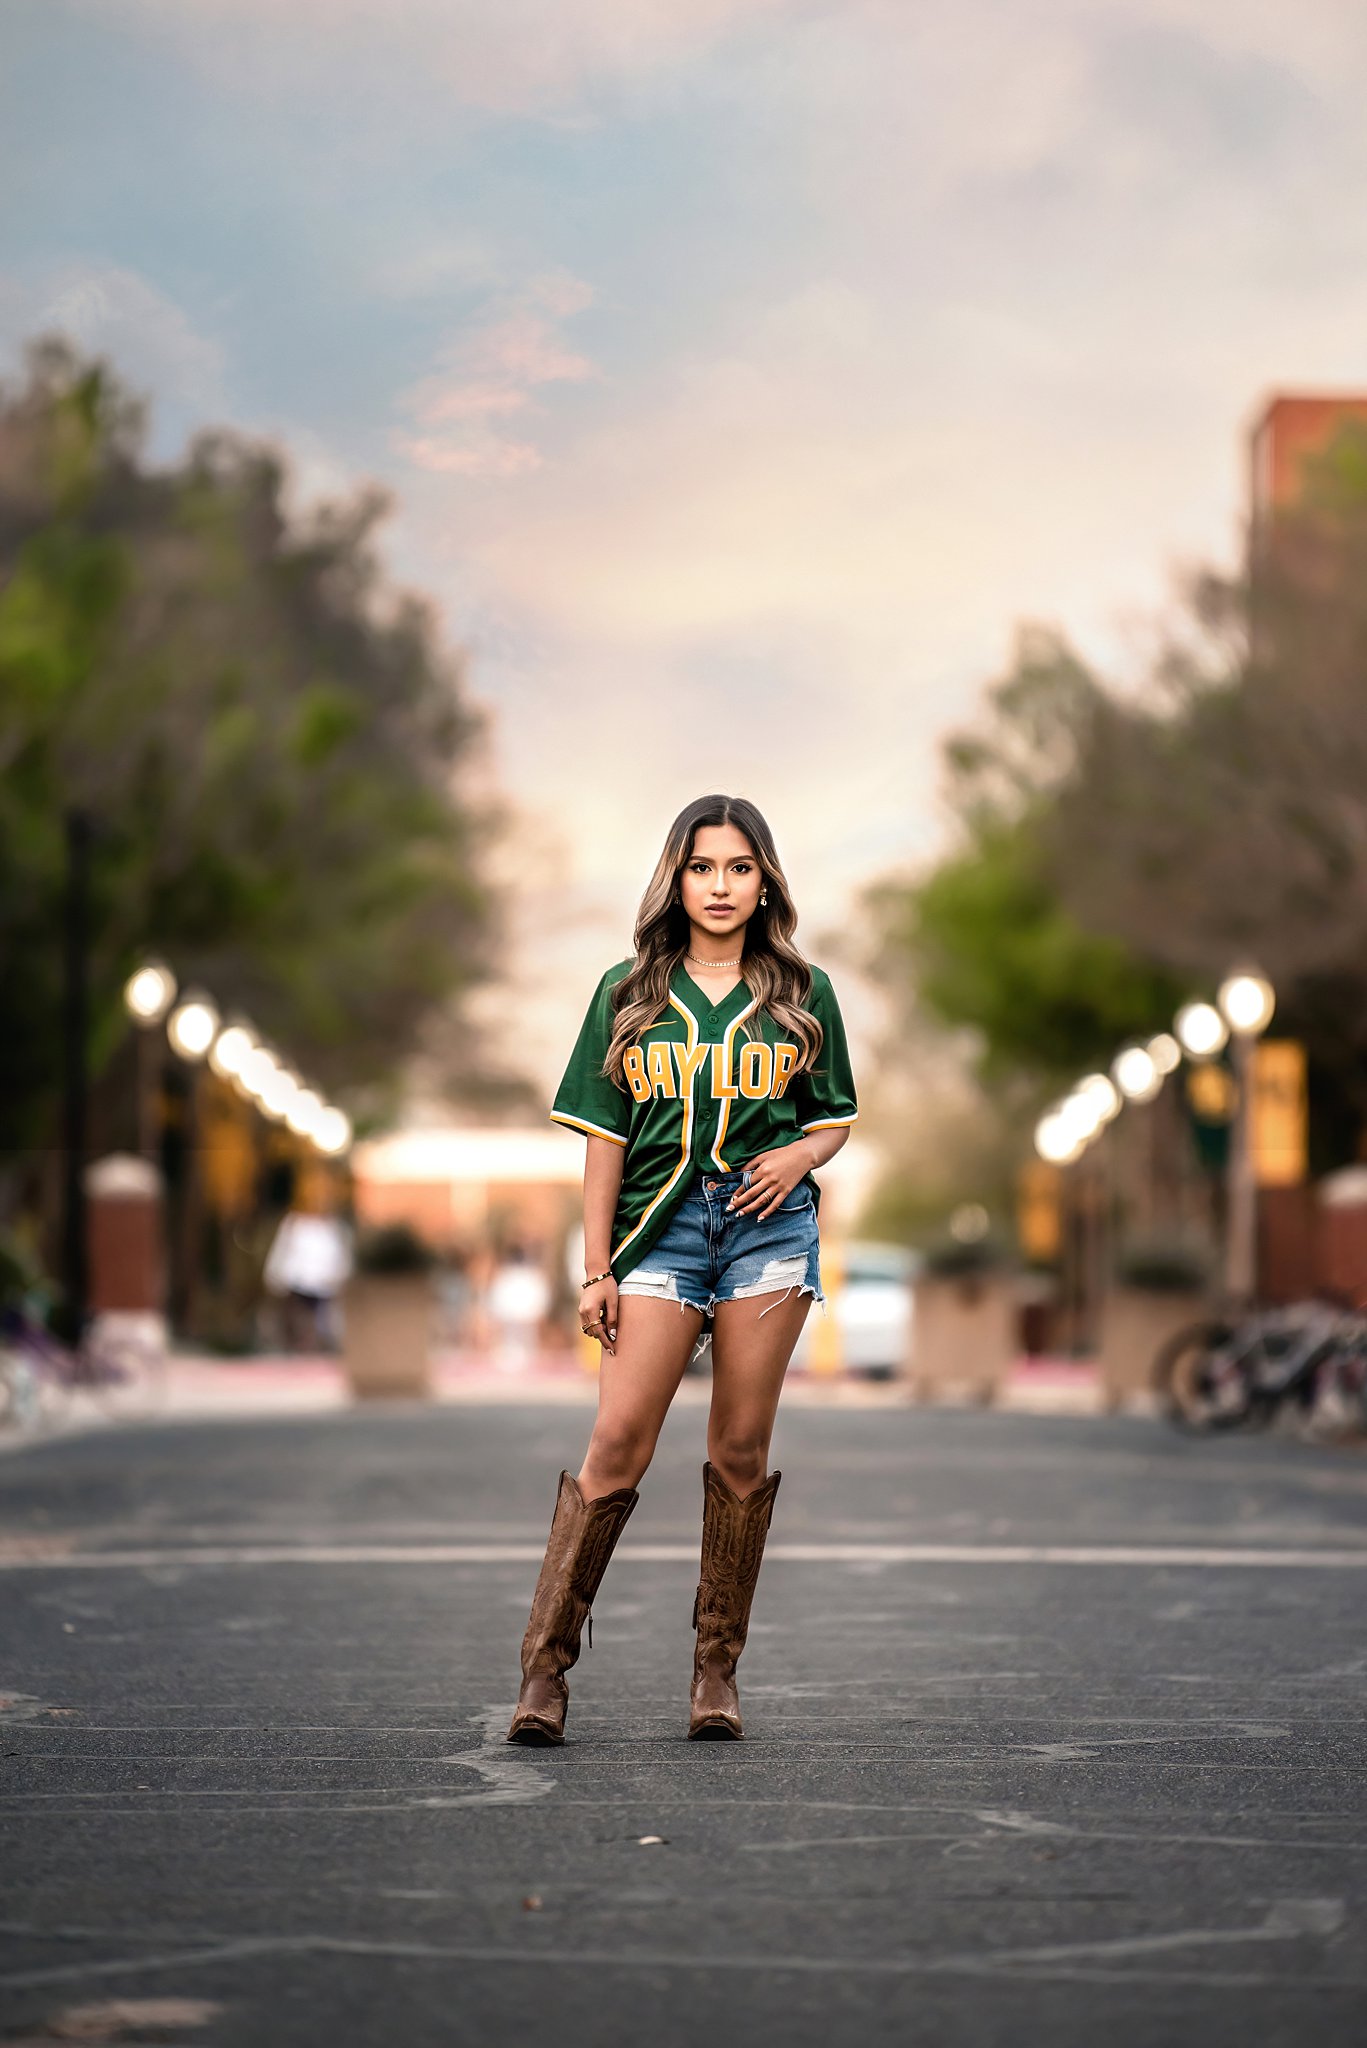 A Baylor graduate stands in a softball jersey and boots in the street at sunset at colleges waco texas